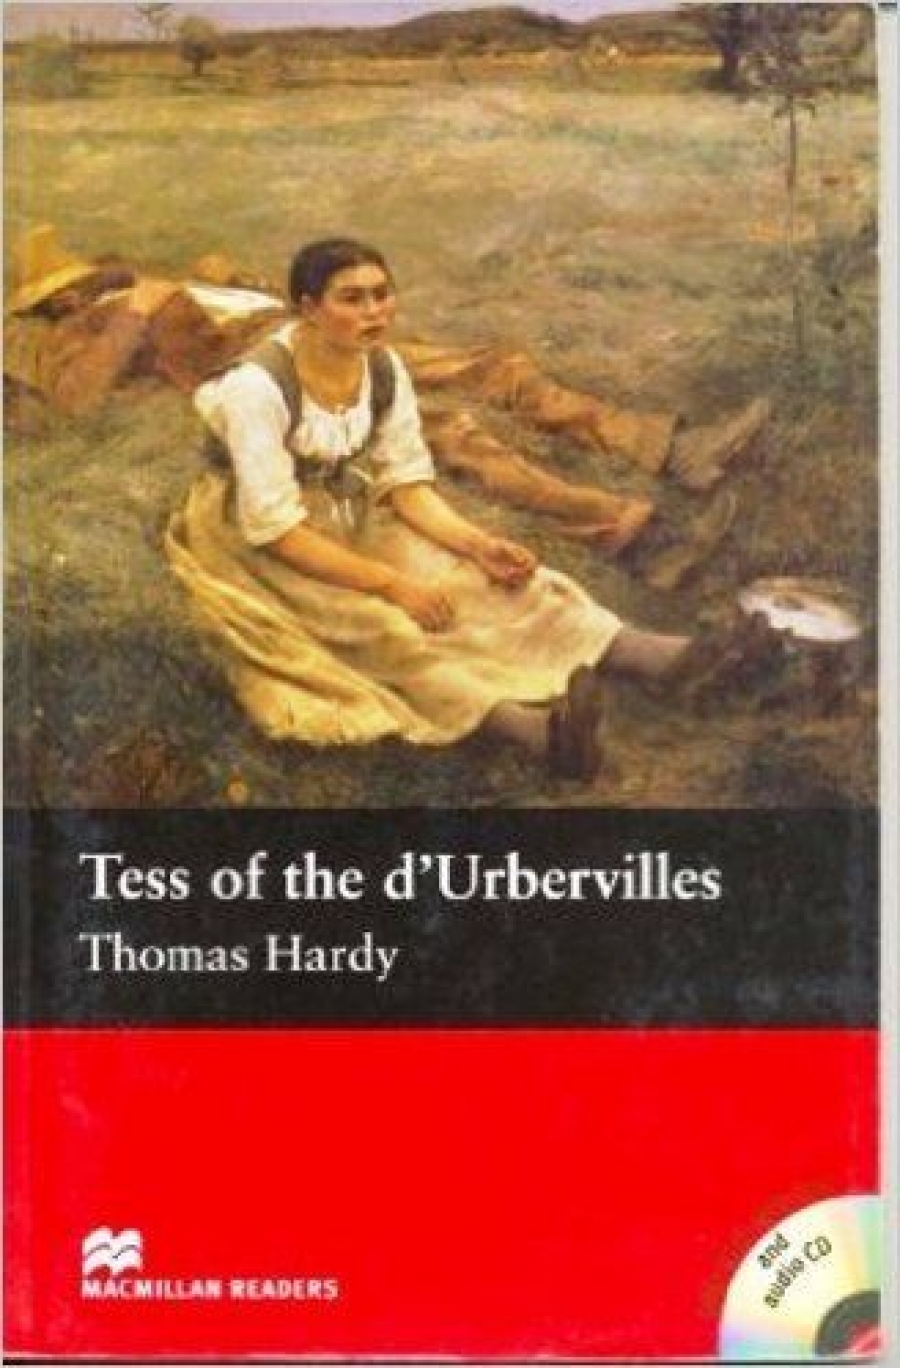 Thomas Hardy, retold by John Escott Tess of the d'Urbervilles (with Audio CD) 